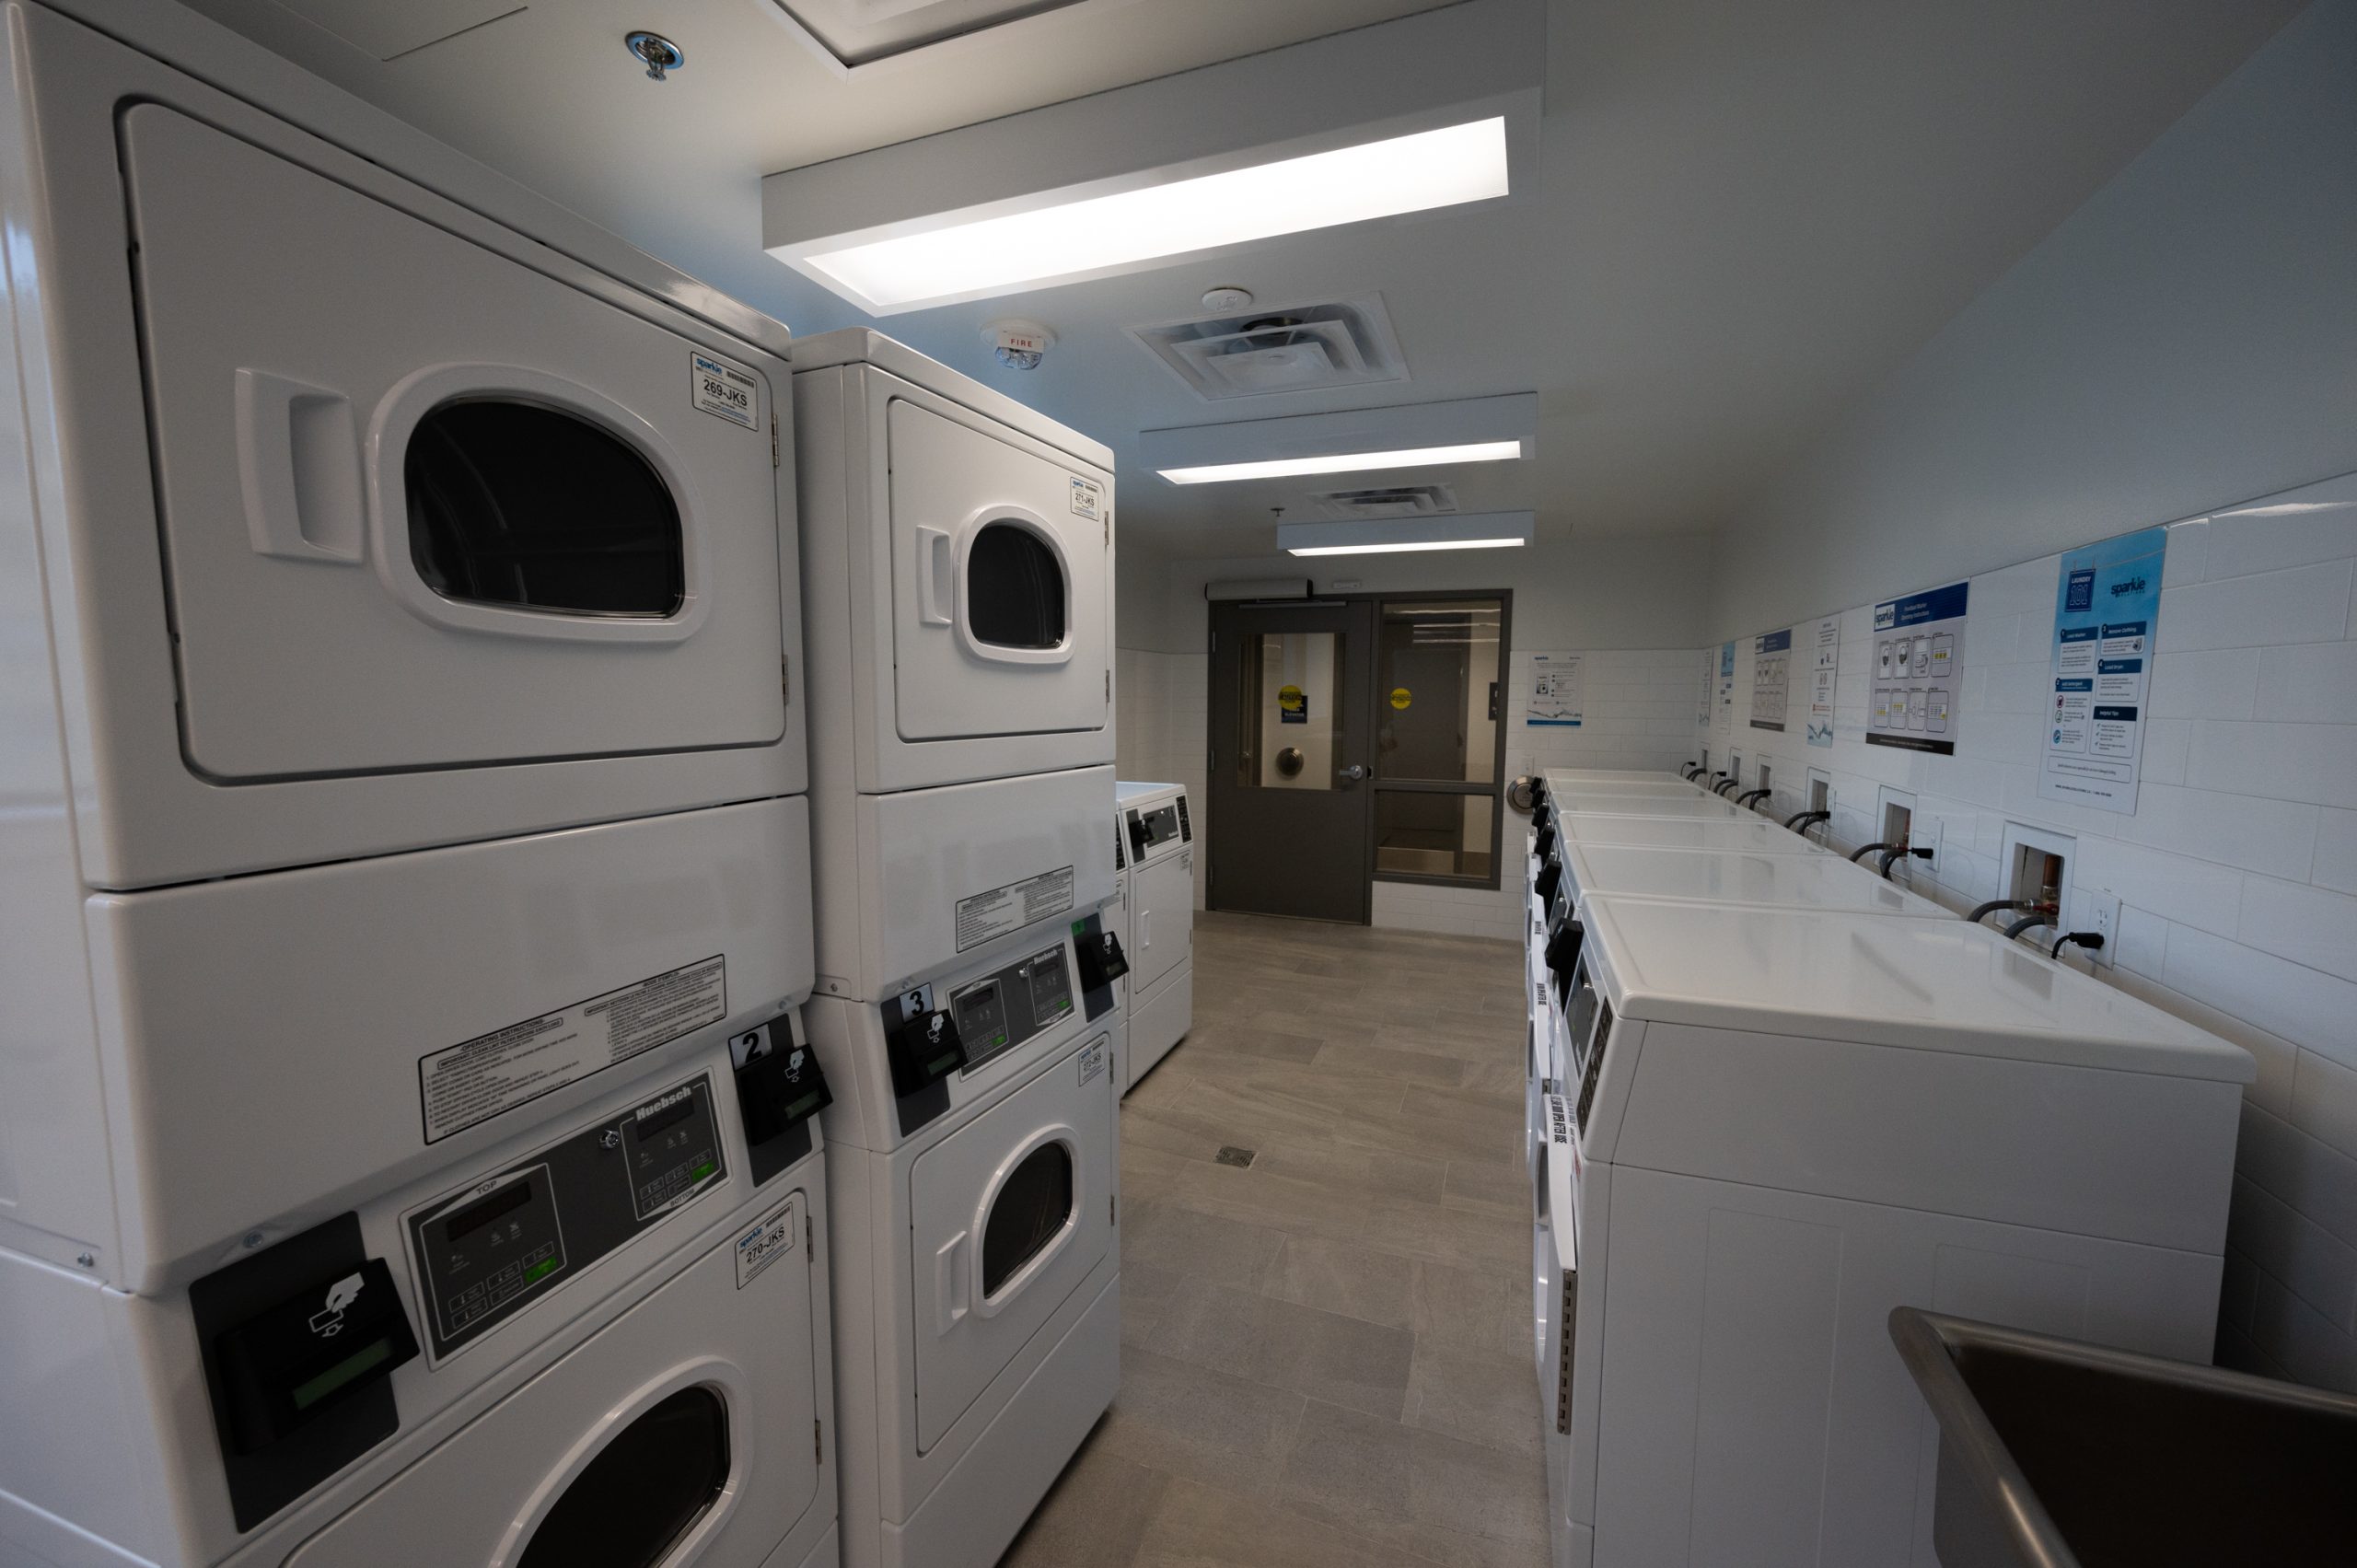 Dryers in laundry room of 389 Church St.